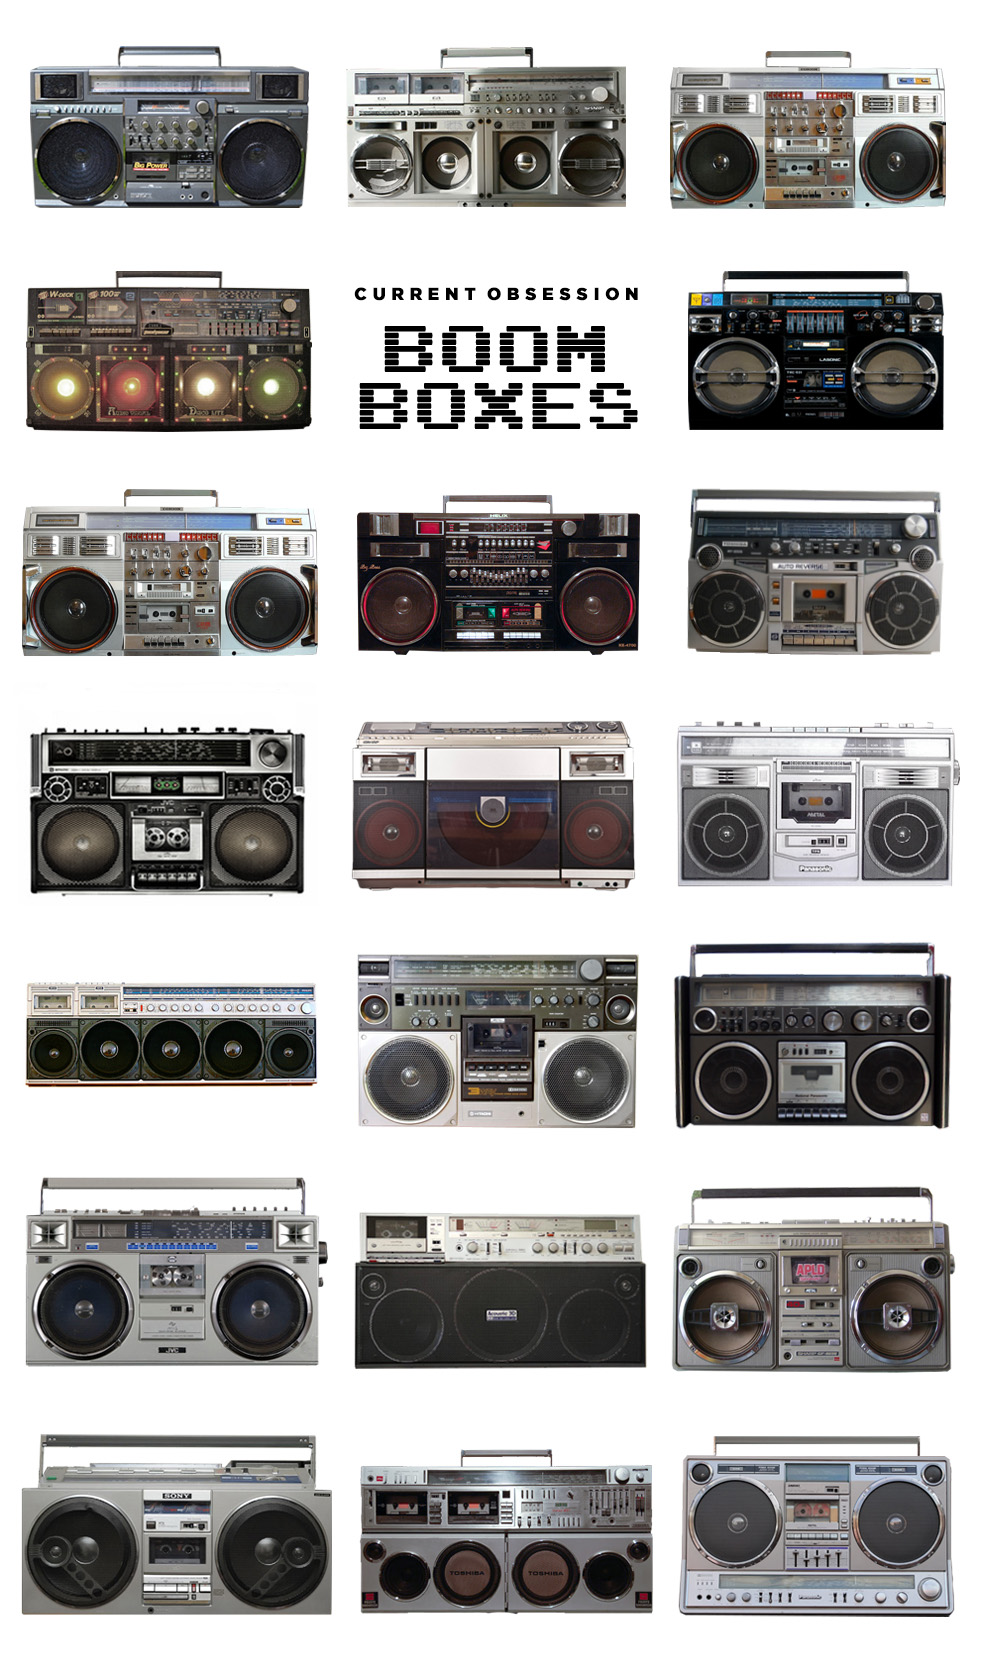 Current Obsession: Boomboxes